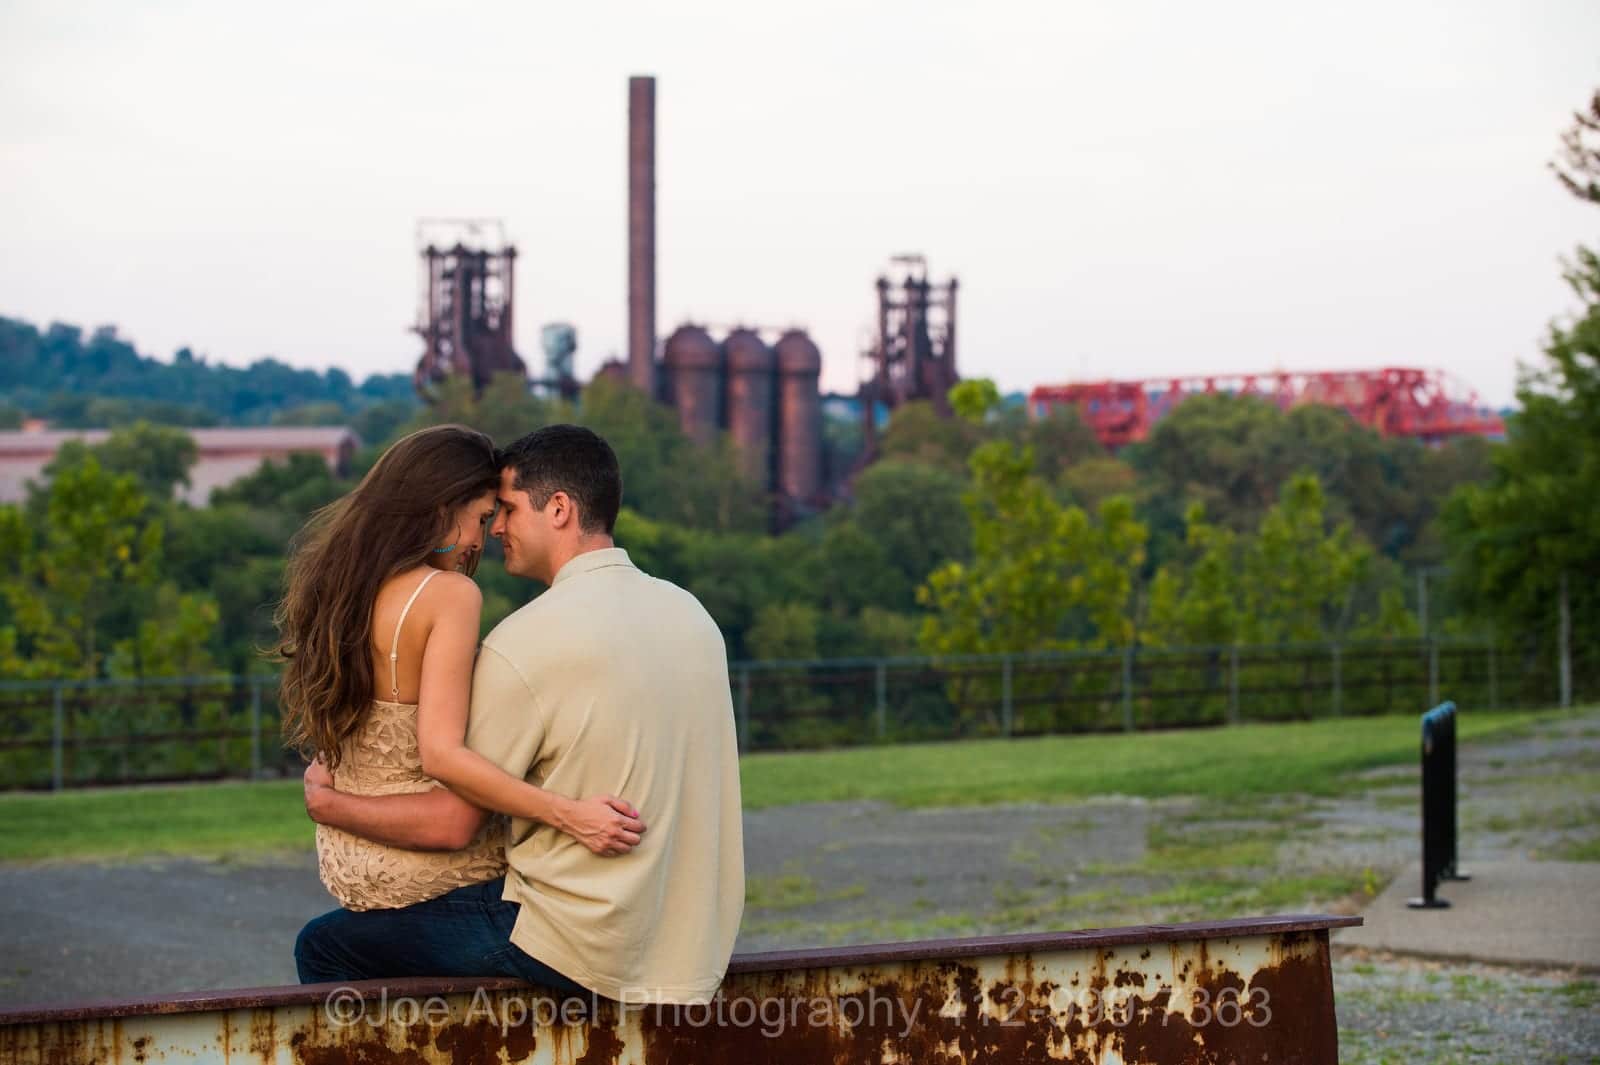 A man and a woman sit on an old i-beam with arms around each other touching foreheads with an old steel mill in the background during their Pump House Engagement Photography session.